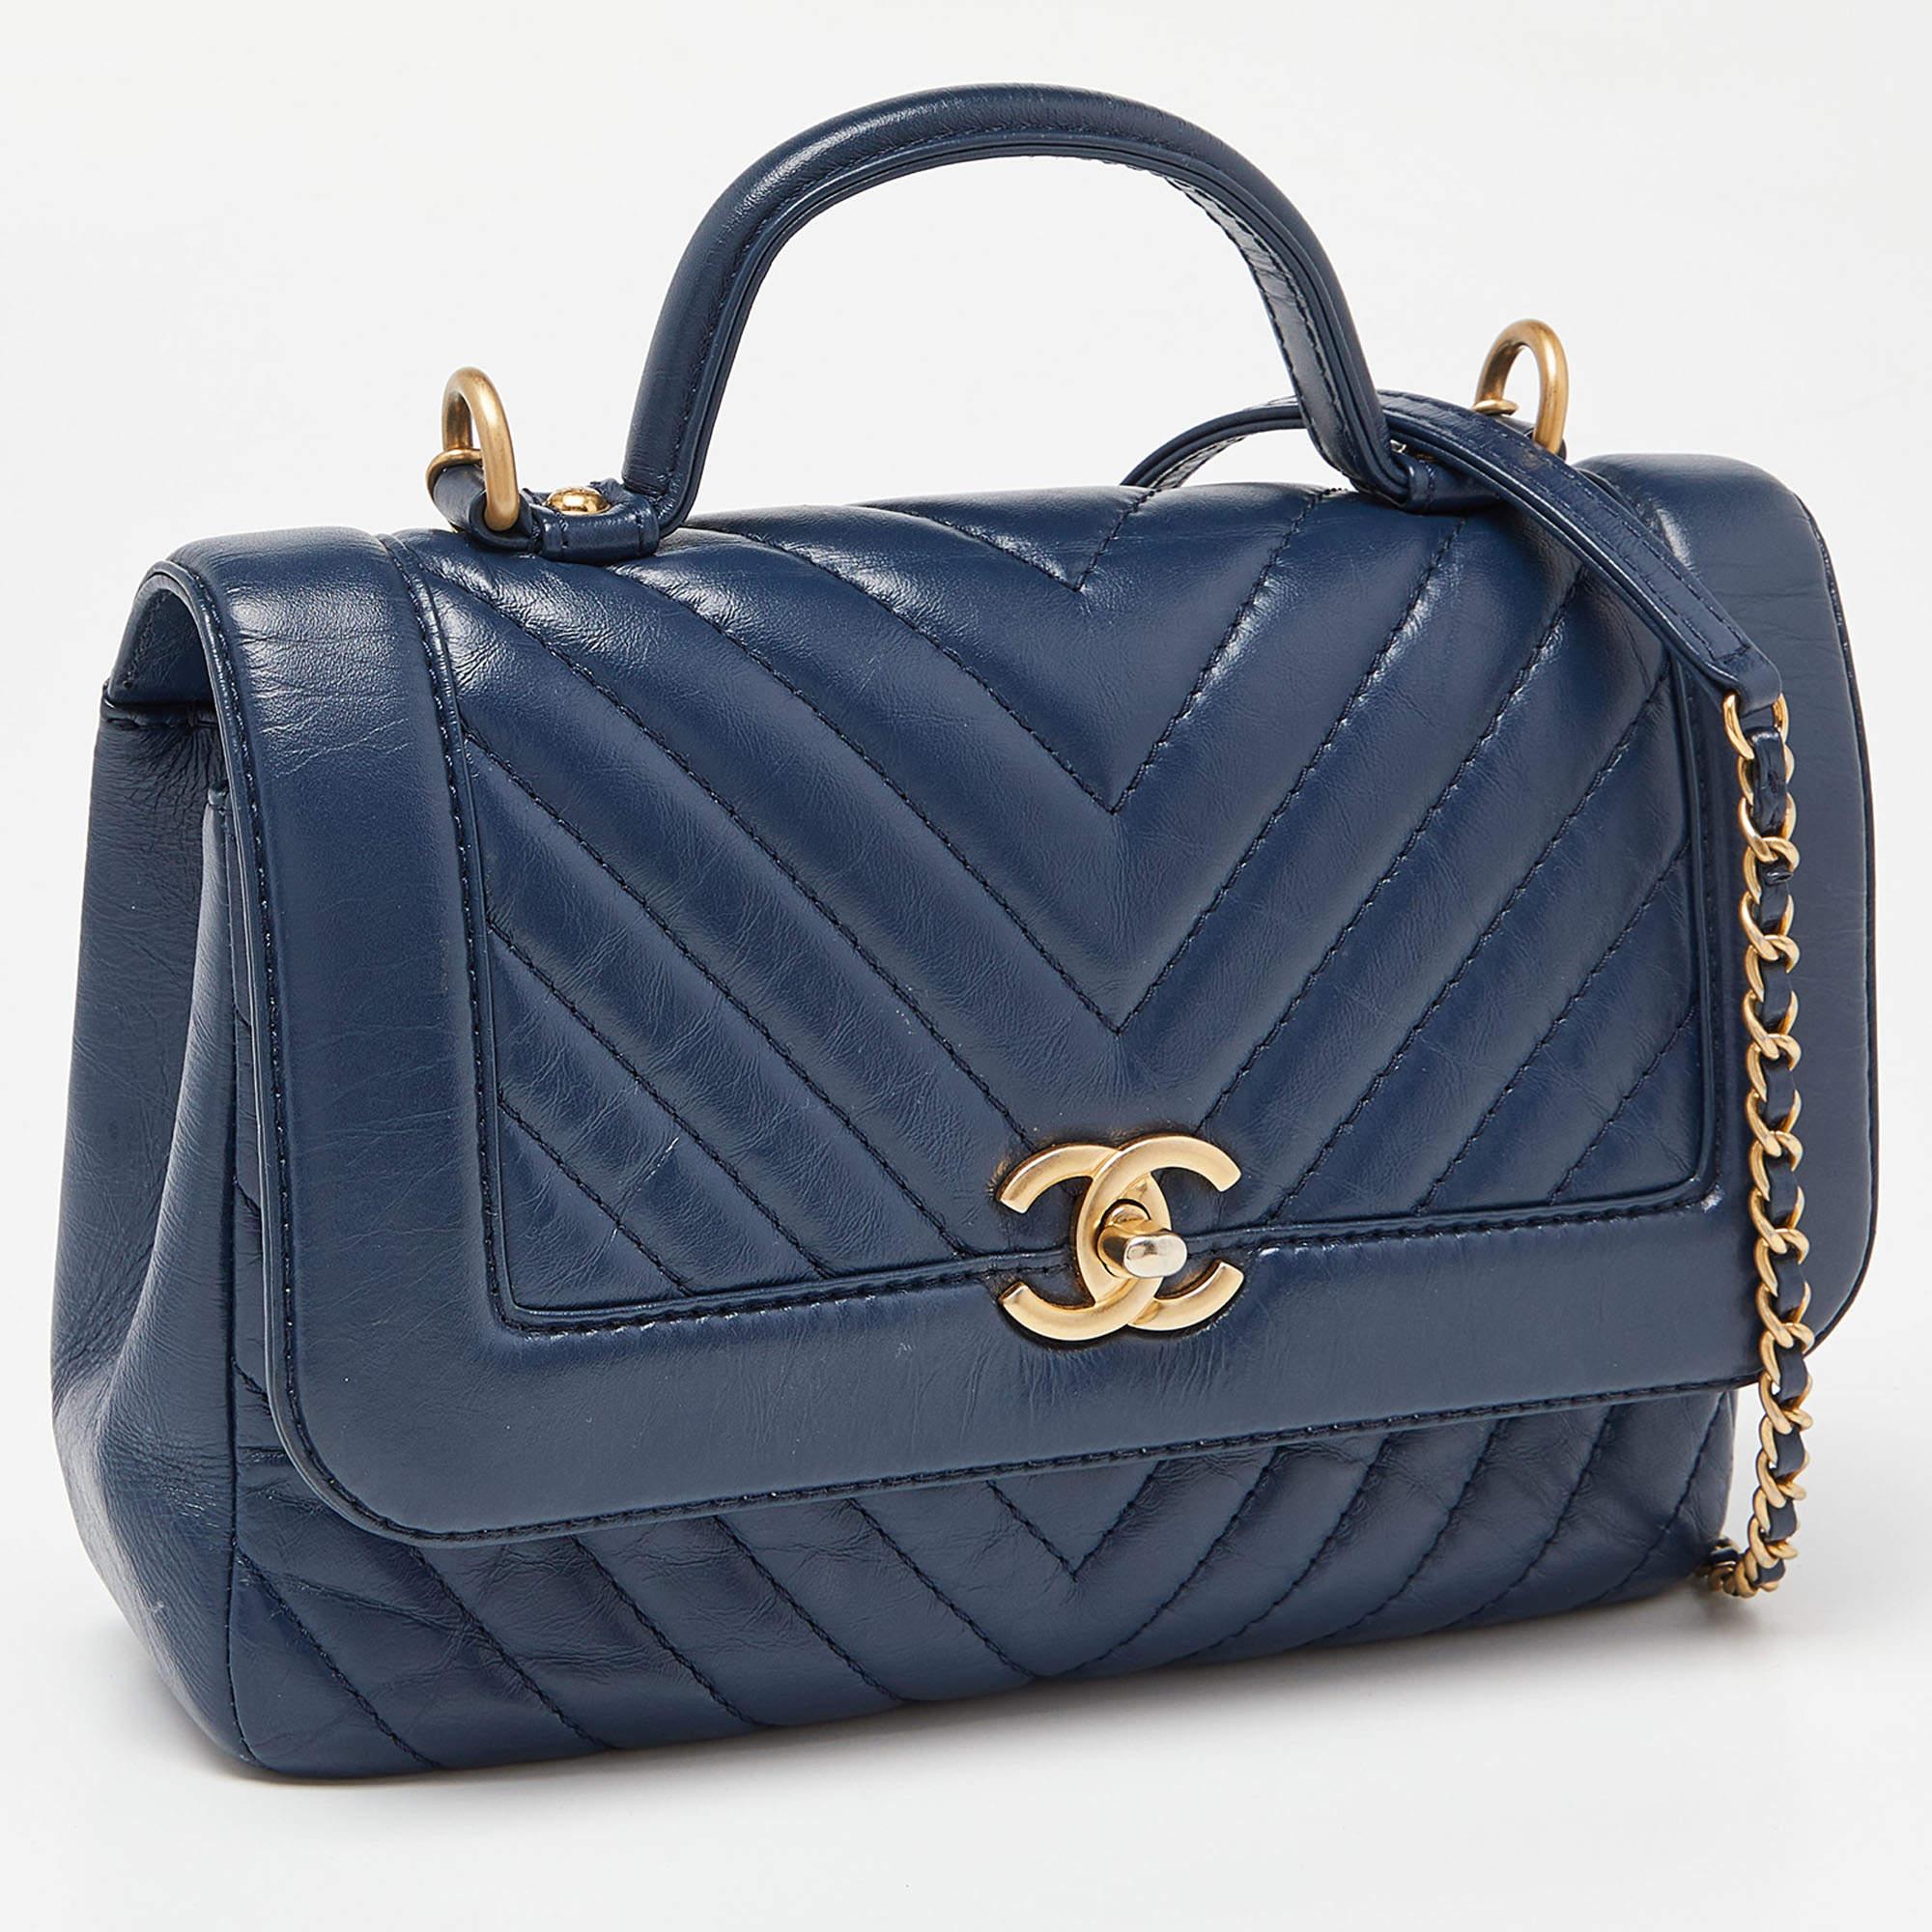 Every creation of Chanel maintains the legacy of the brand with its brilliant craftsmanship and artistic designs. This Classic bag comes exquisitely created from Chevron leather and embodies an alluring appeal. While the chain-leather shoulder strap